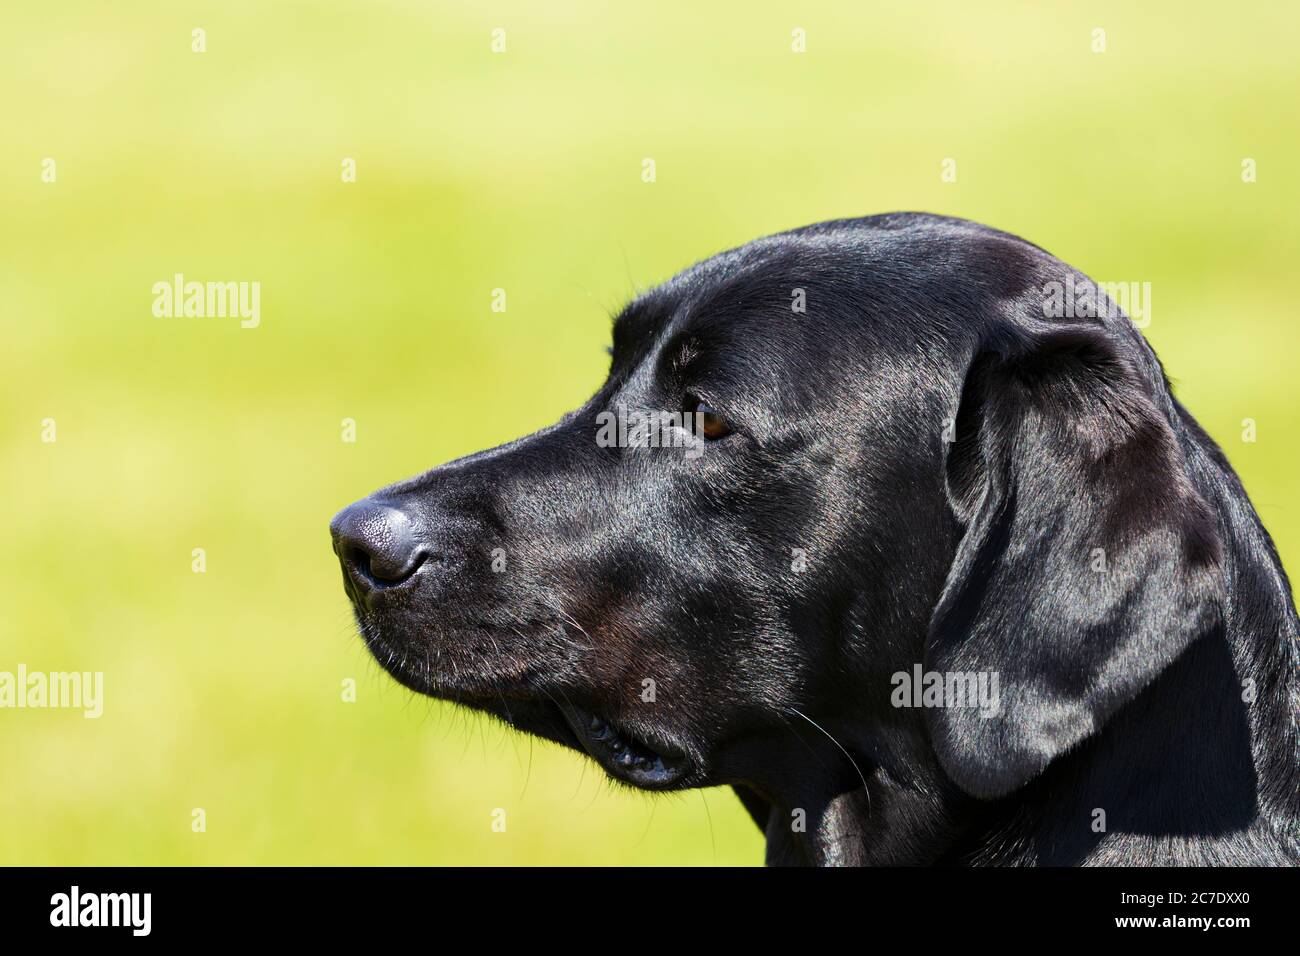 Alert Male black Labrador dog head against out of focus green grass background Stock Photo